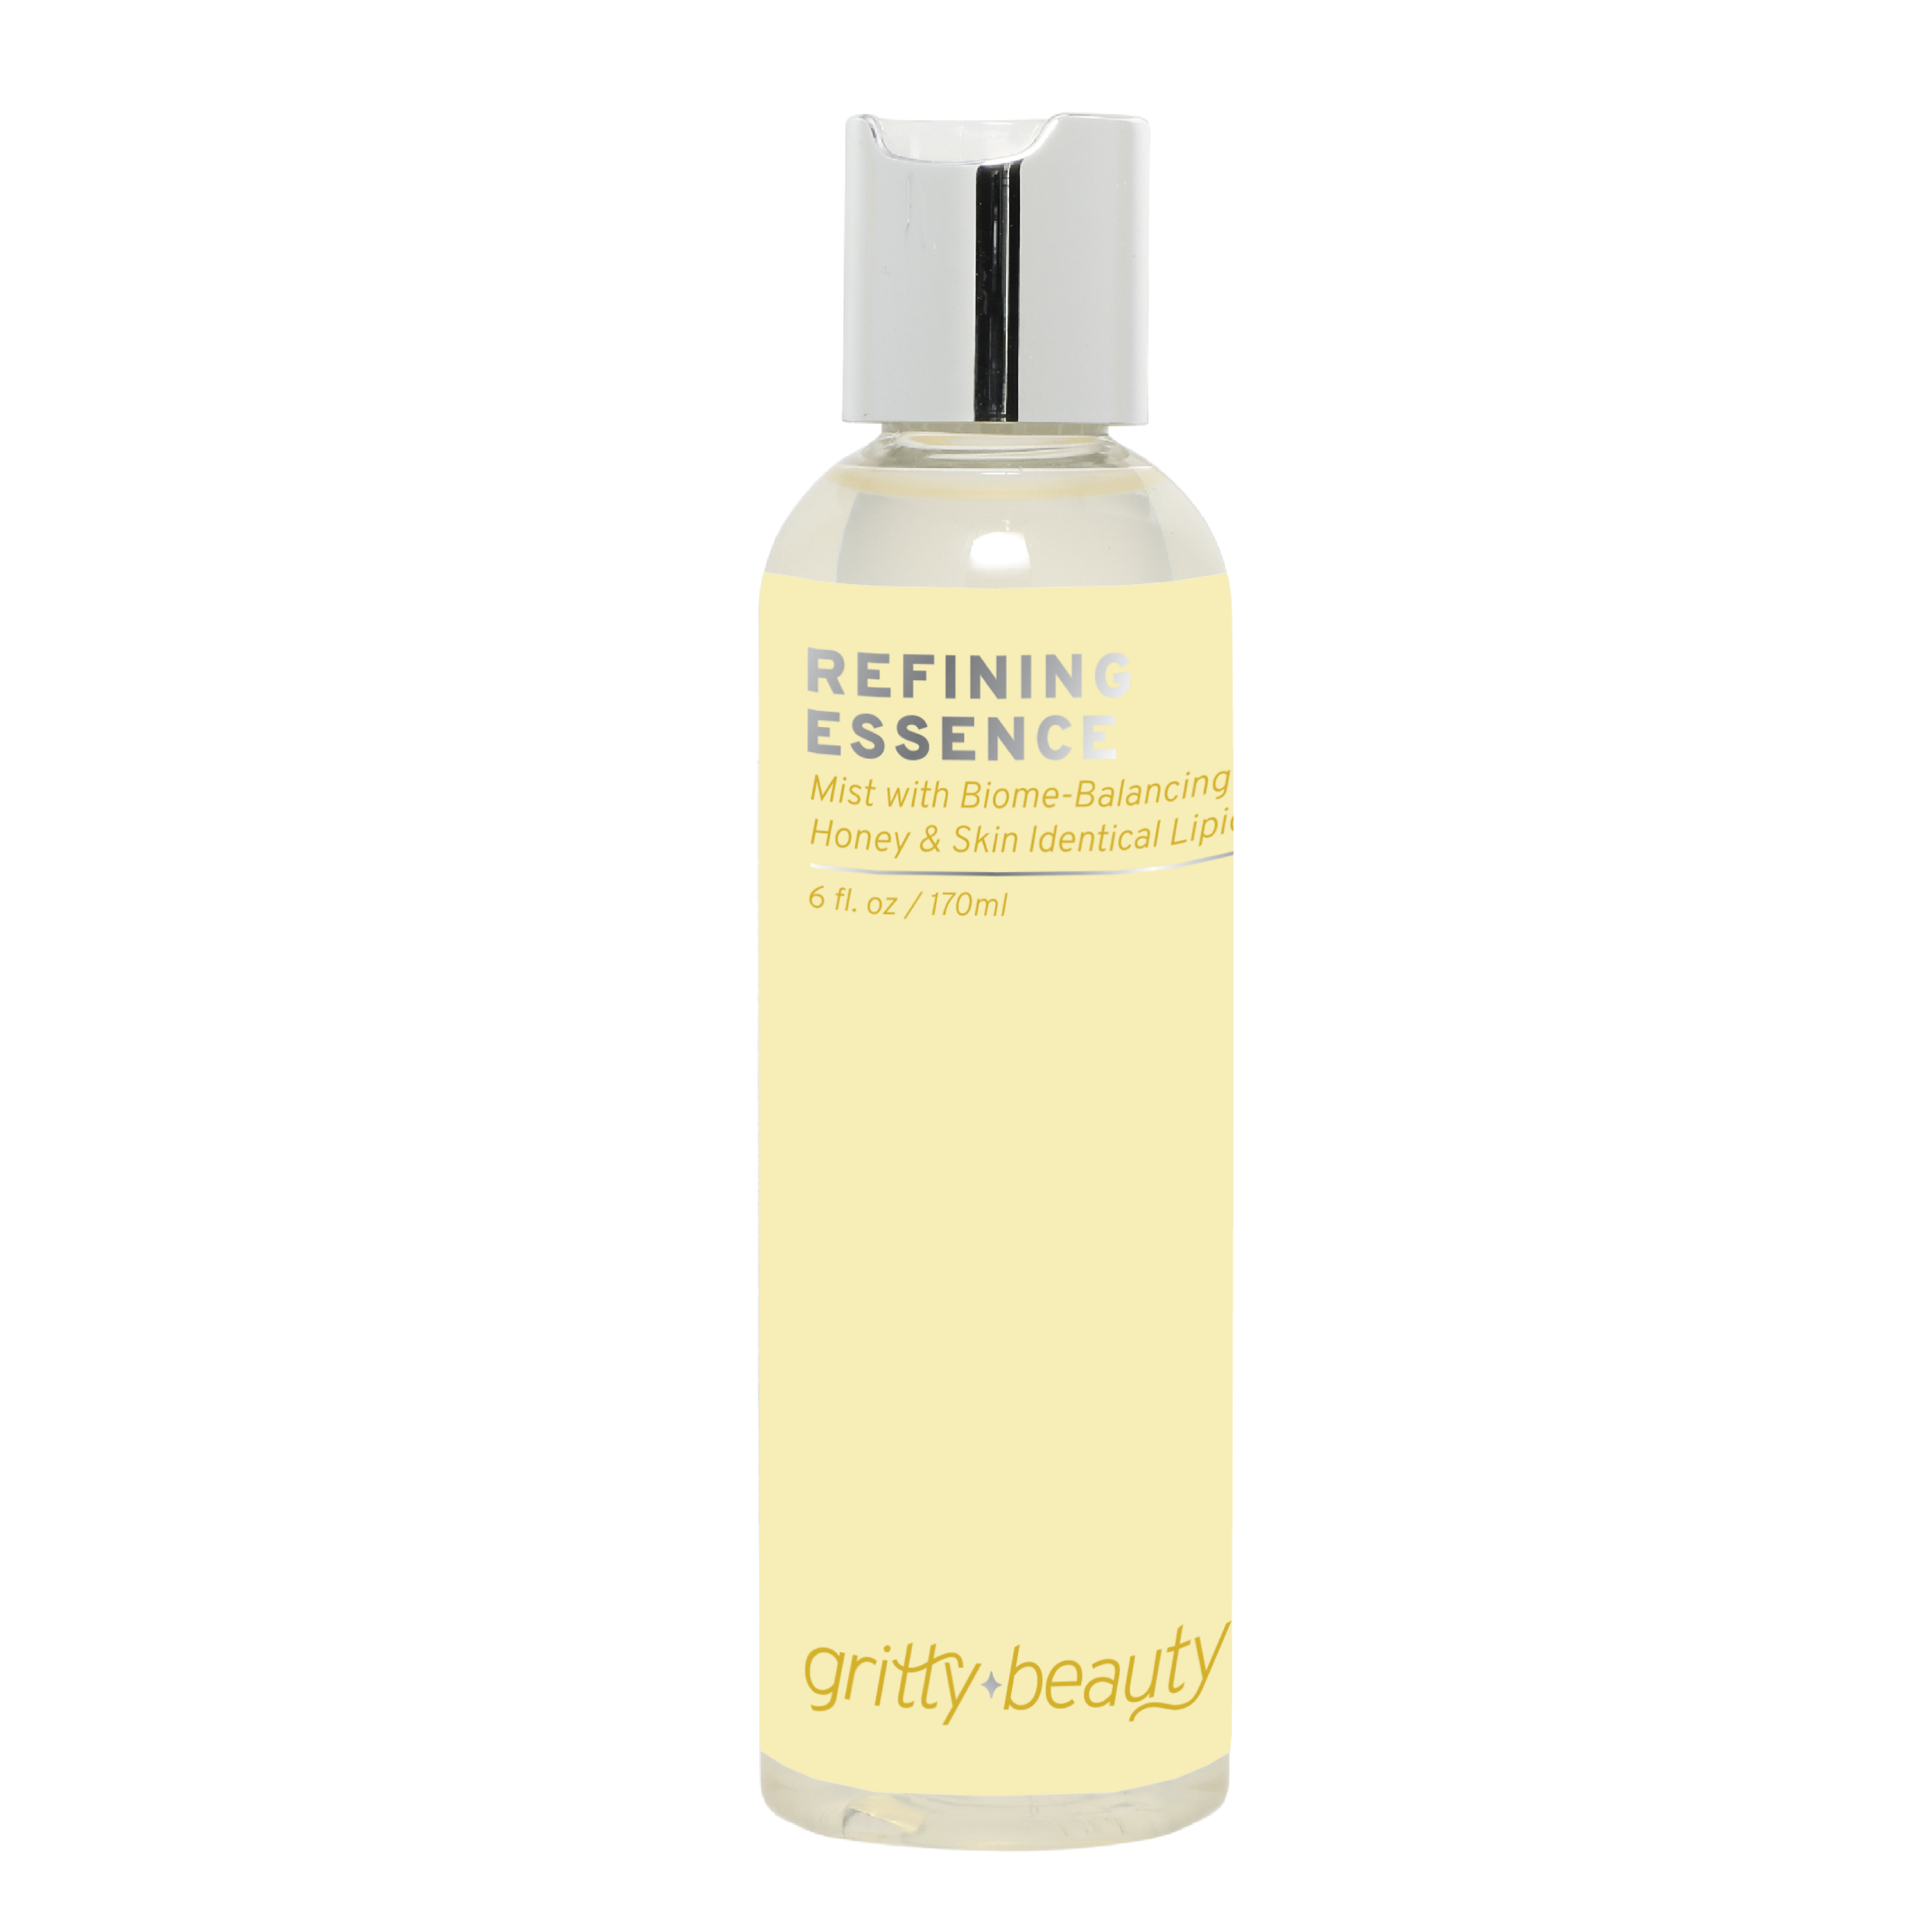 Refining Essence | Gritty Beauty - Click to Buy!